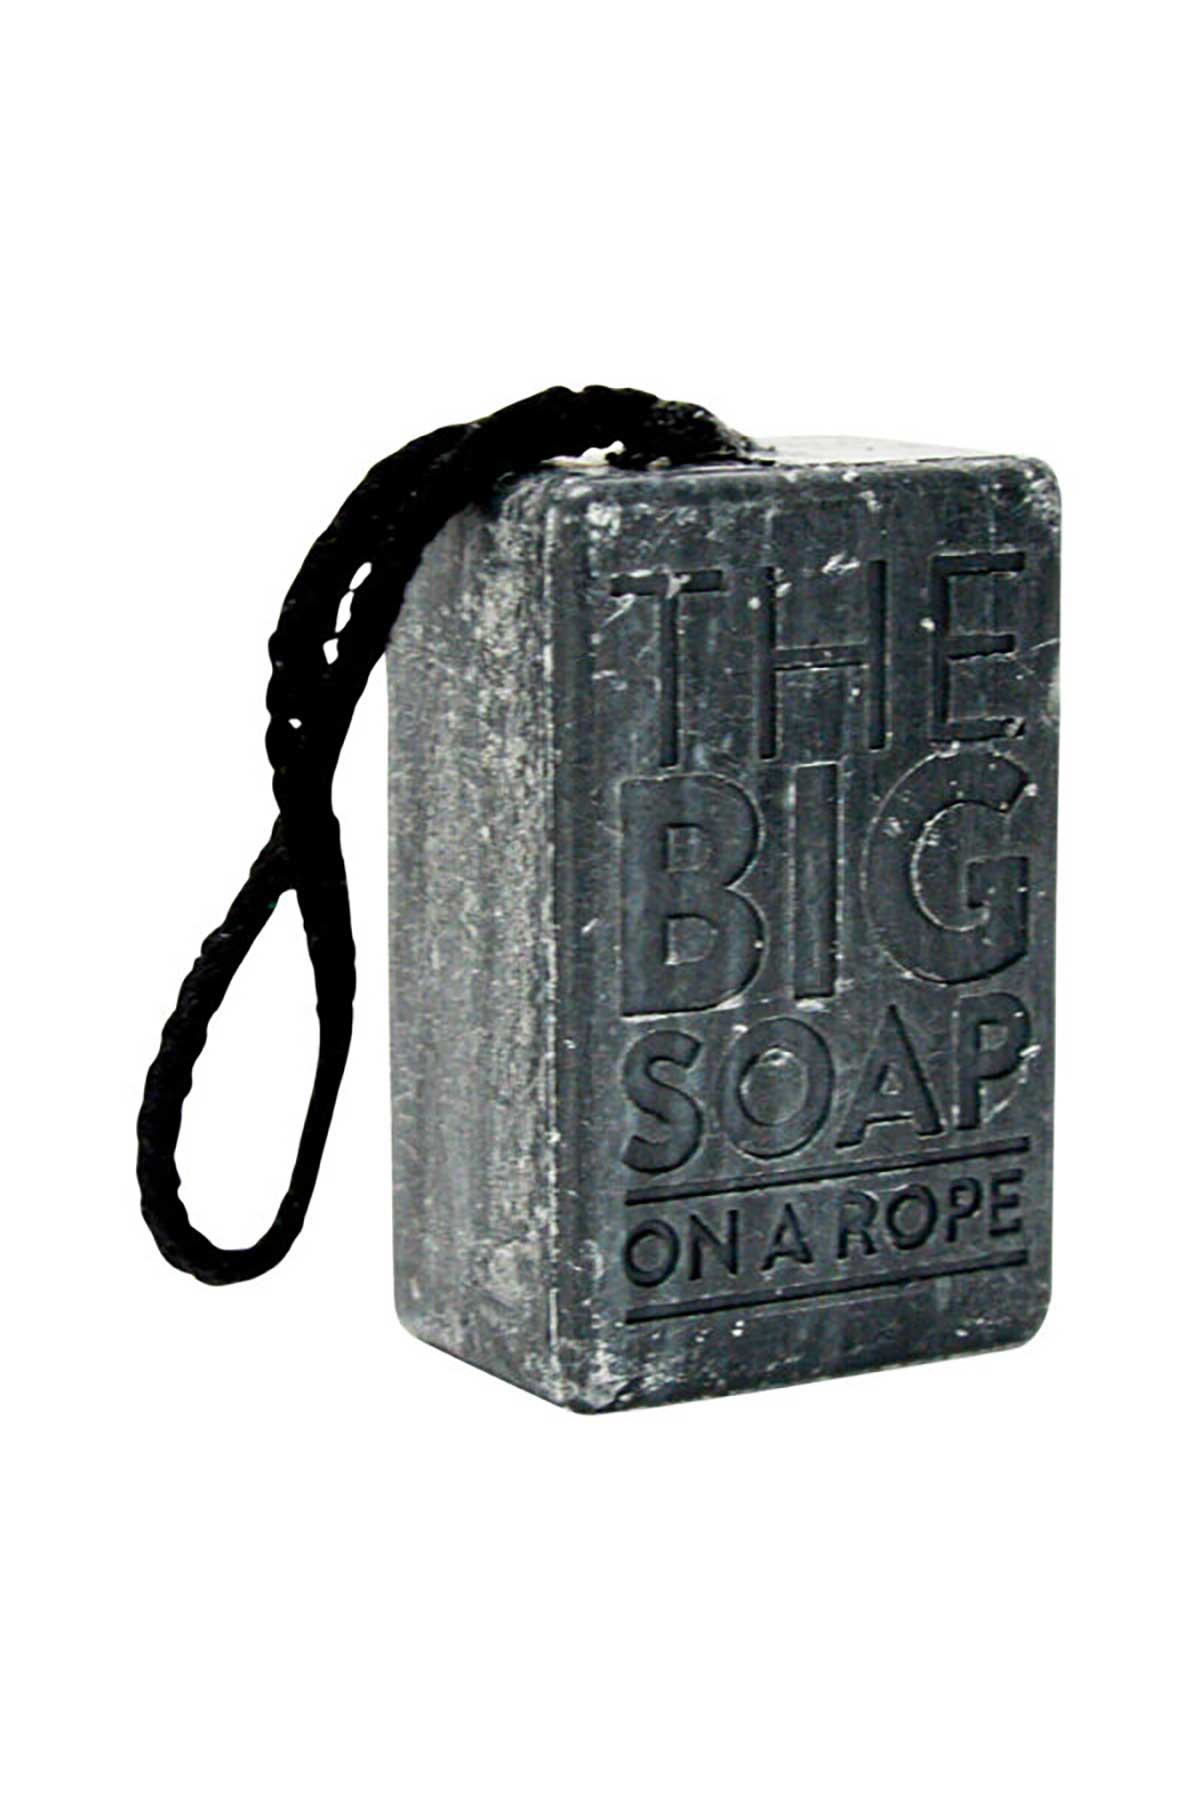 Annabel Trends Soap on a Rope - The Big Soap Unboxed